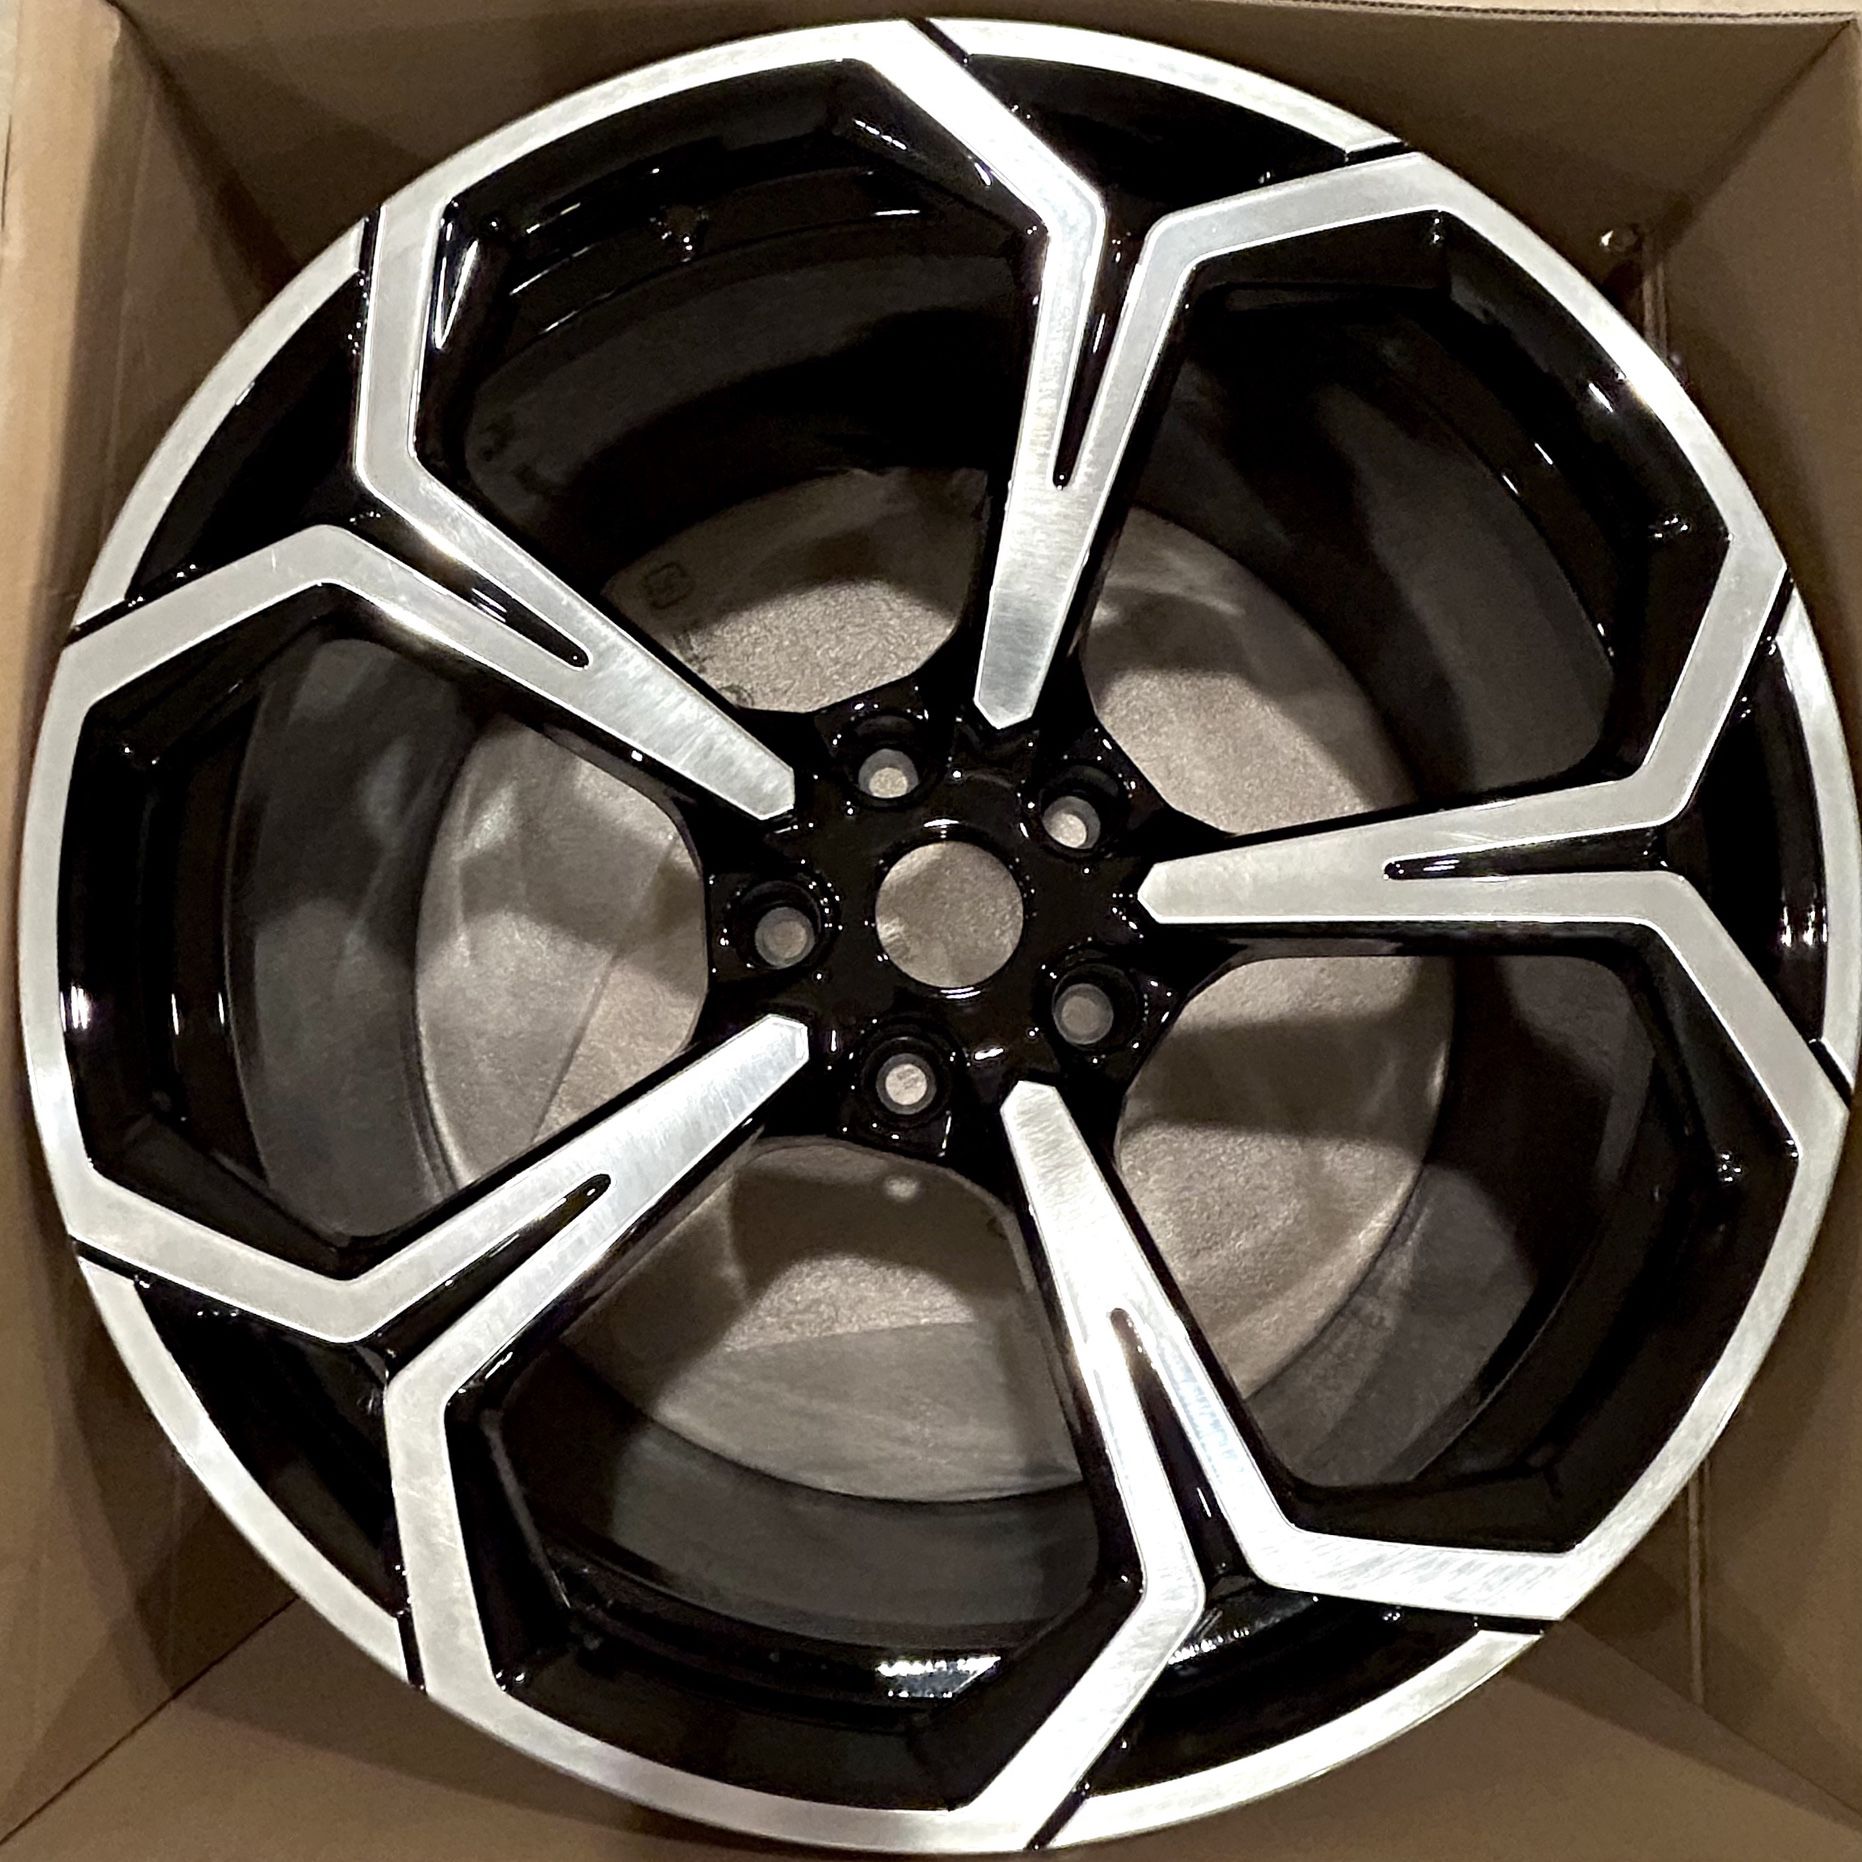 22” Lamborghini URUS Rear Rim, NEW. Never Mounted, still in the sane box that came from factory